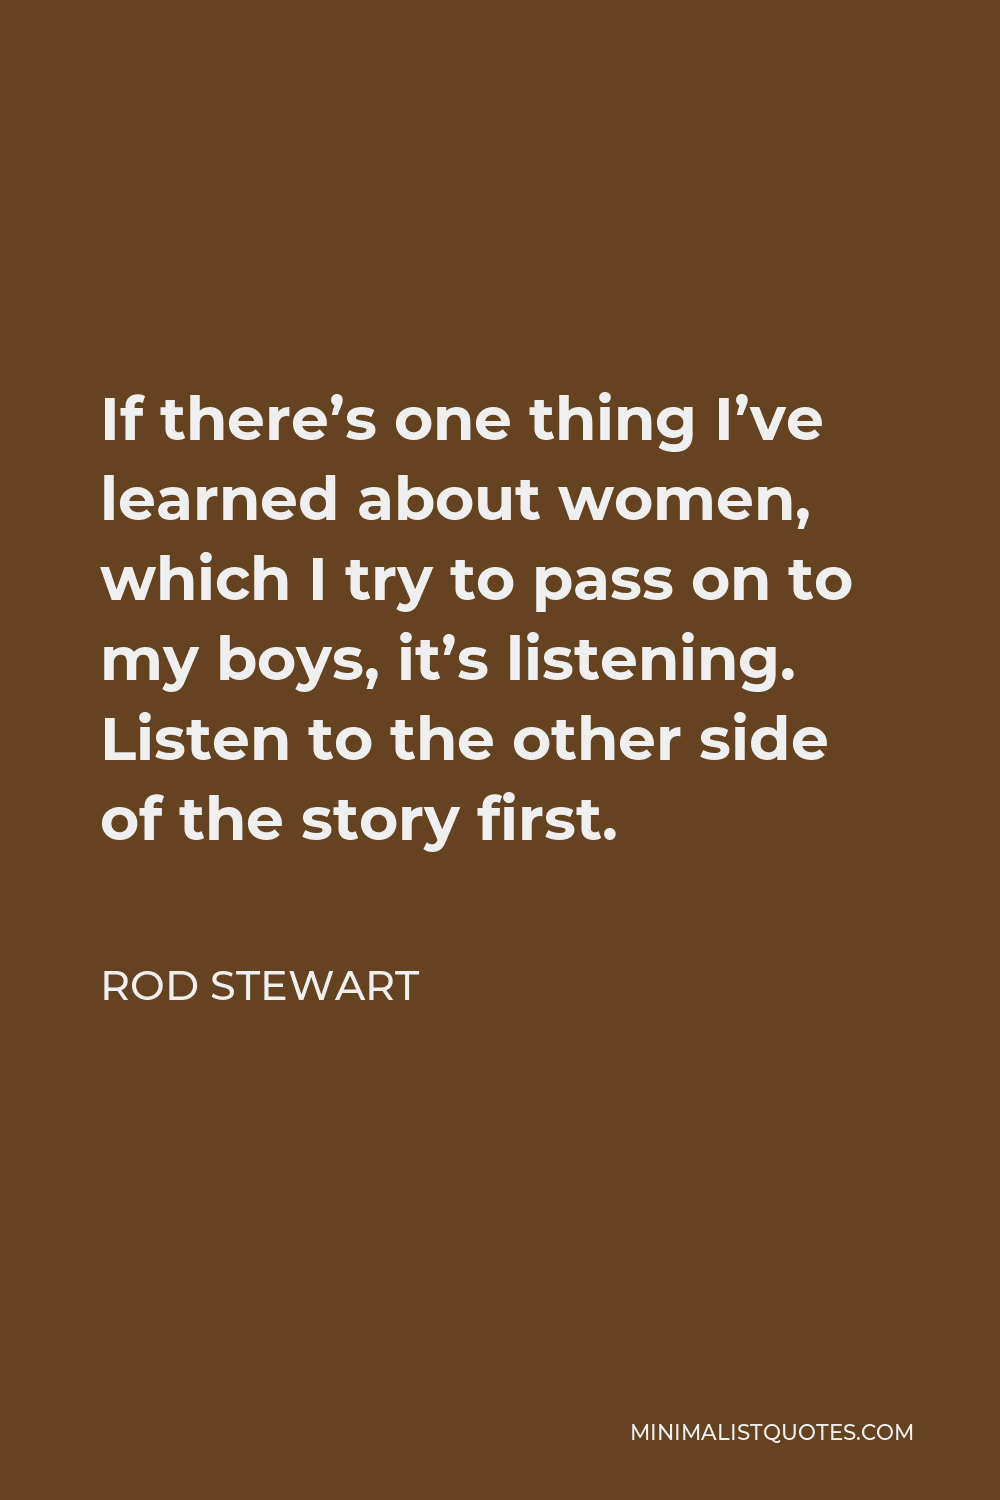 Rod Stewart Quote - If there’s one thing I’ve learned about women, which I try to pass on to my boys, it’s listening. Listen to the other side of the story first.